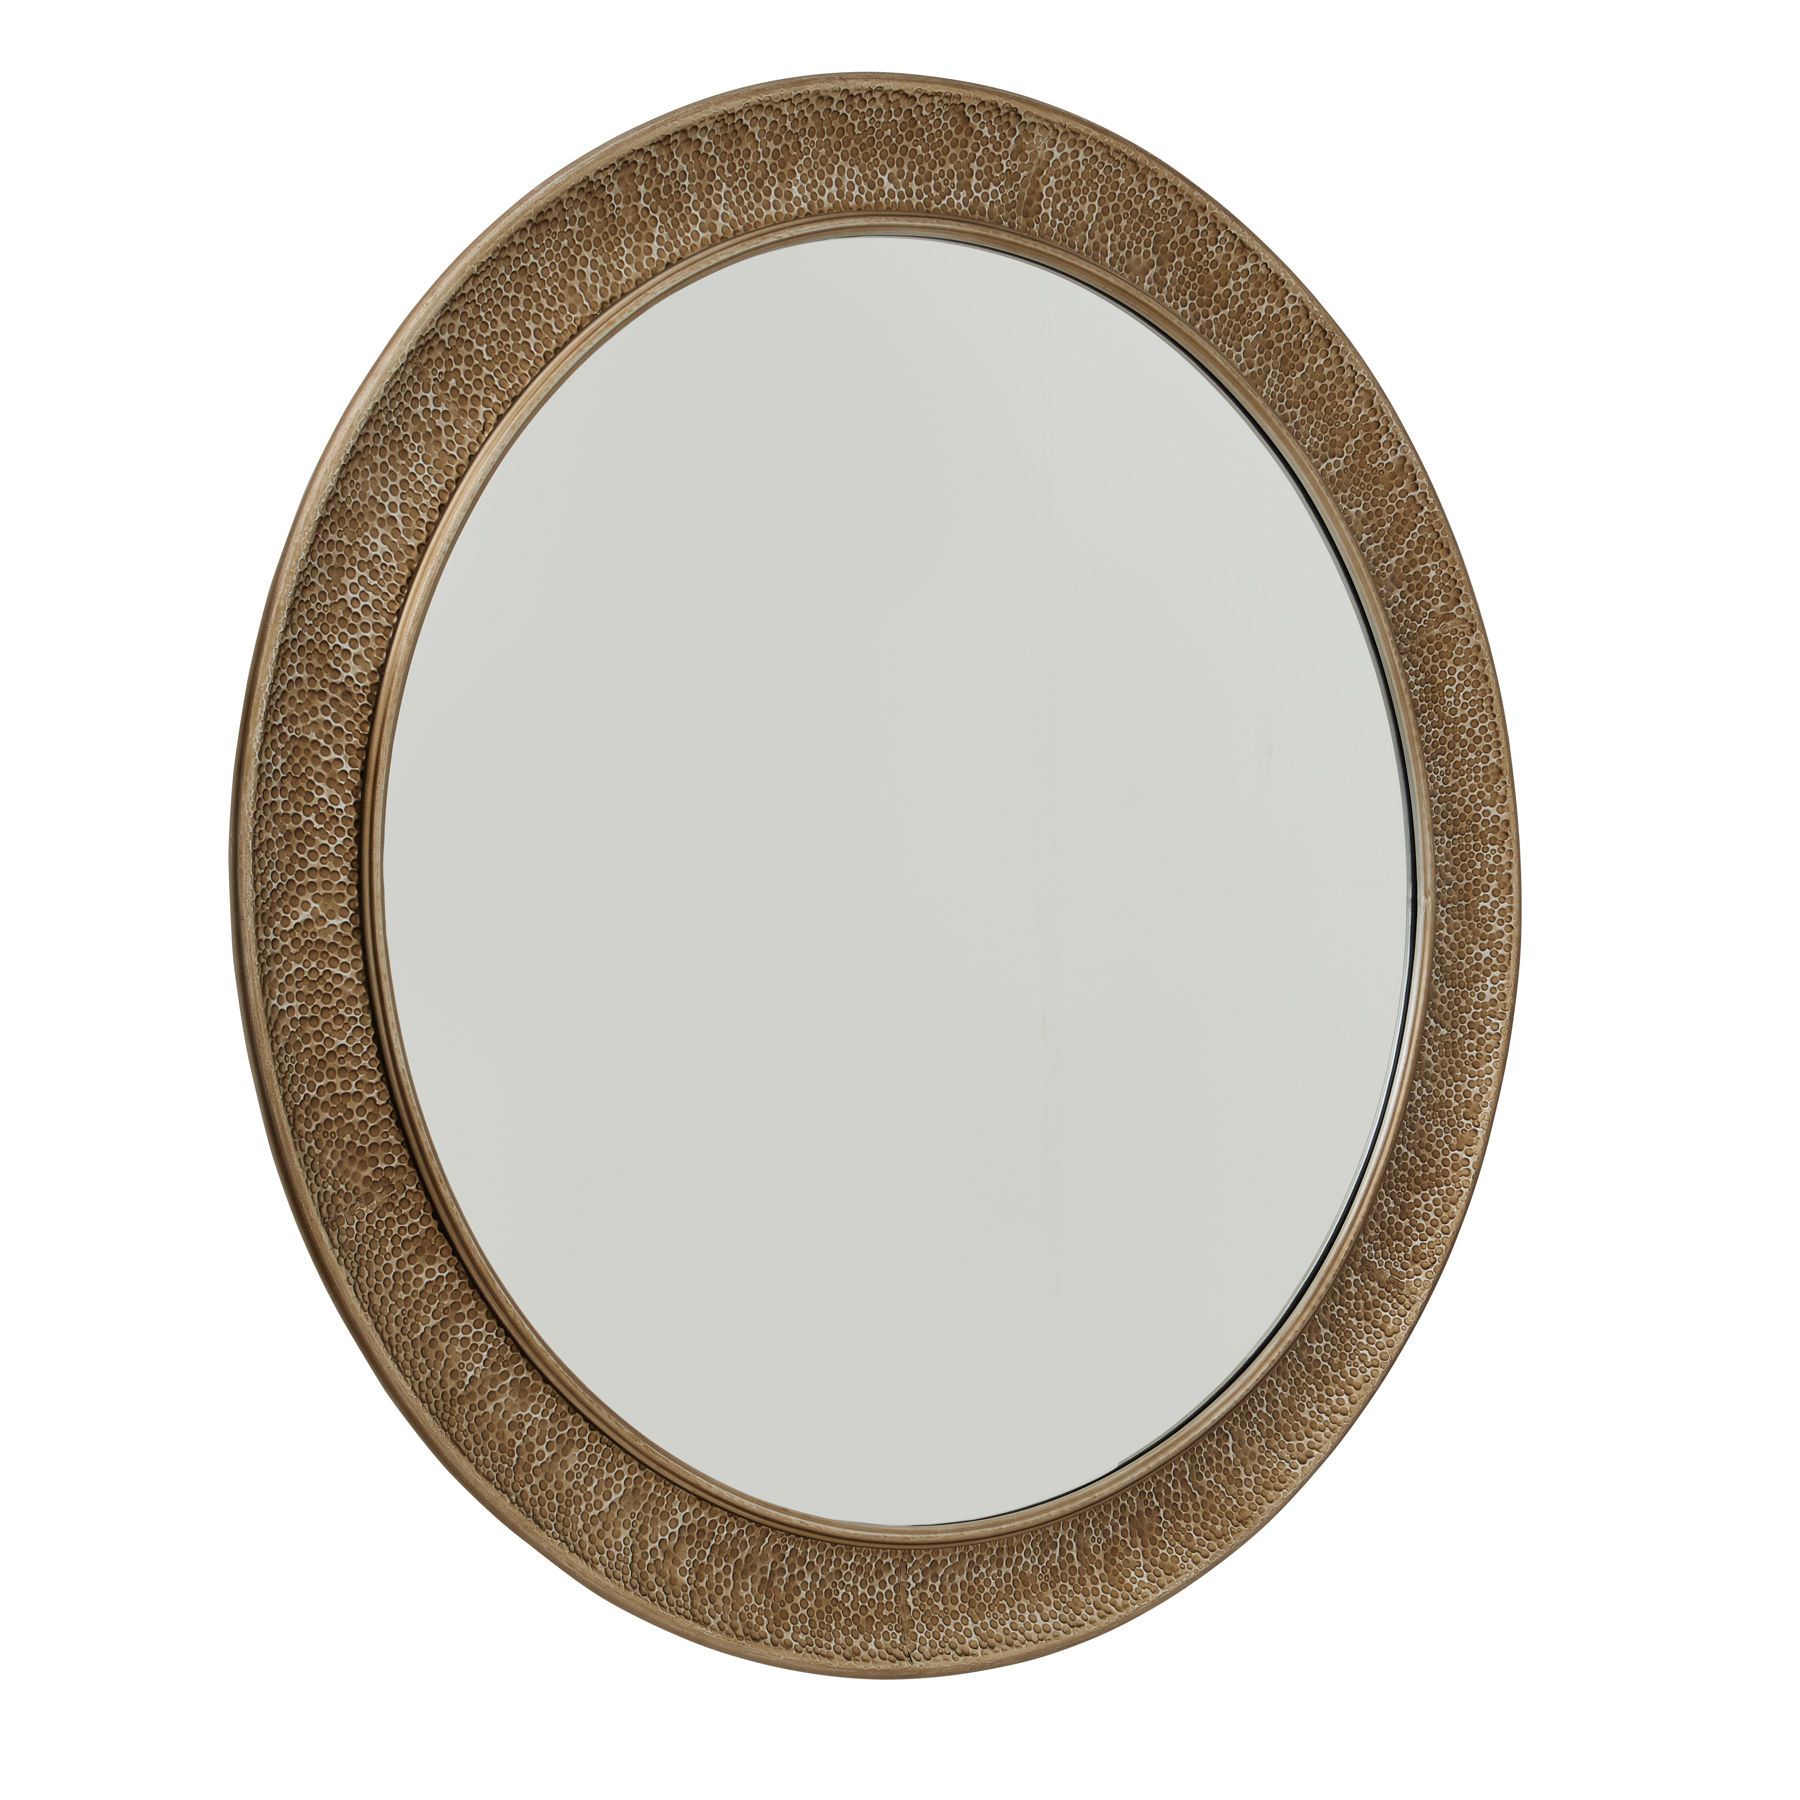 Hammered Large Silver Wall Mirror - Image 1